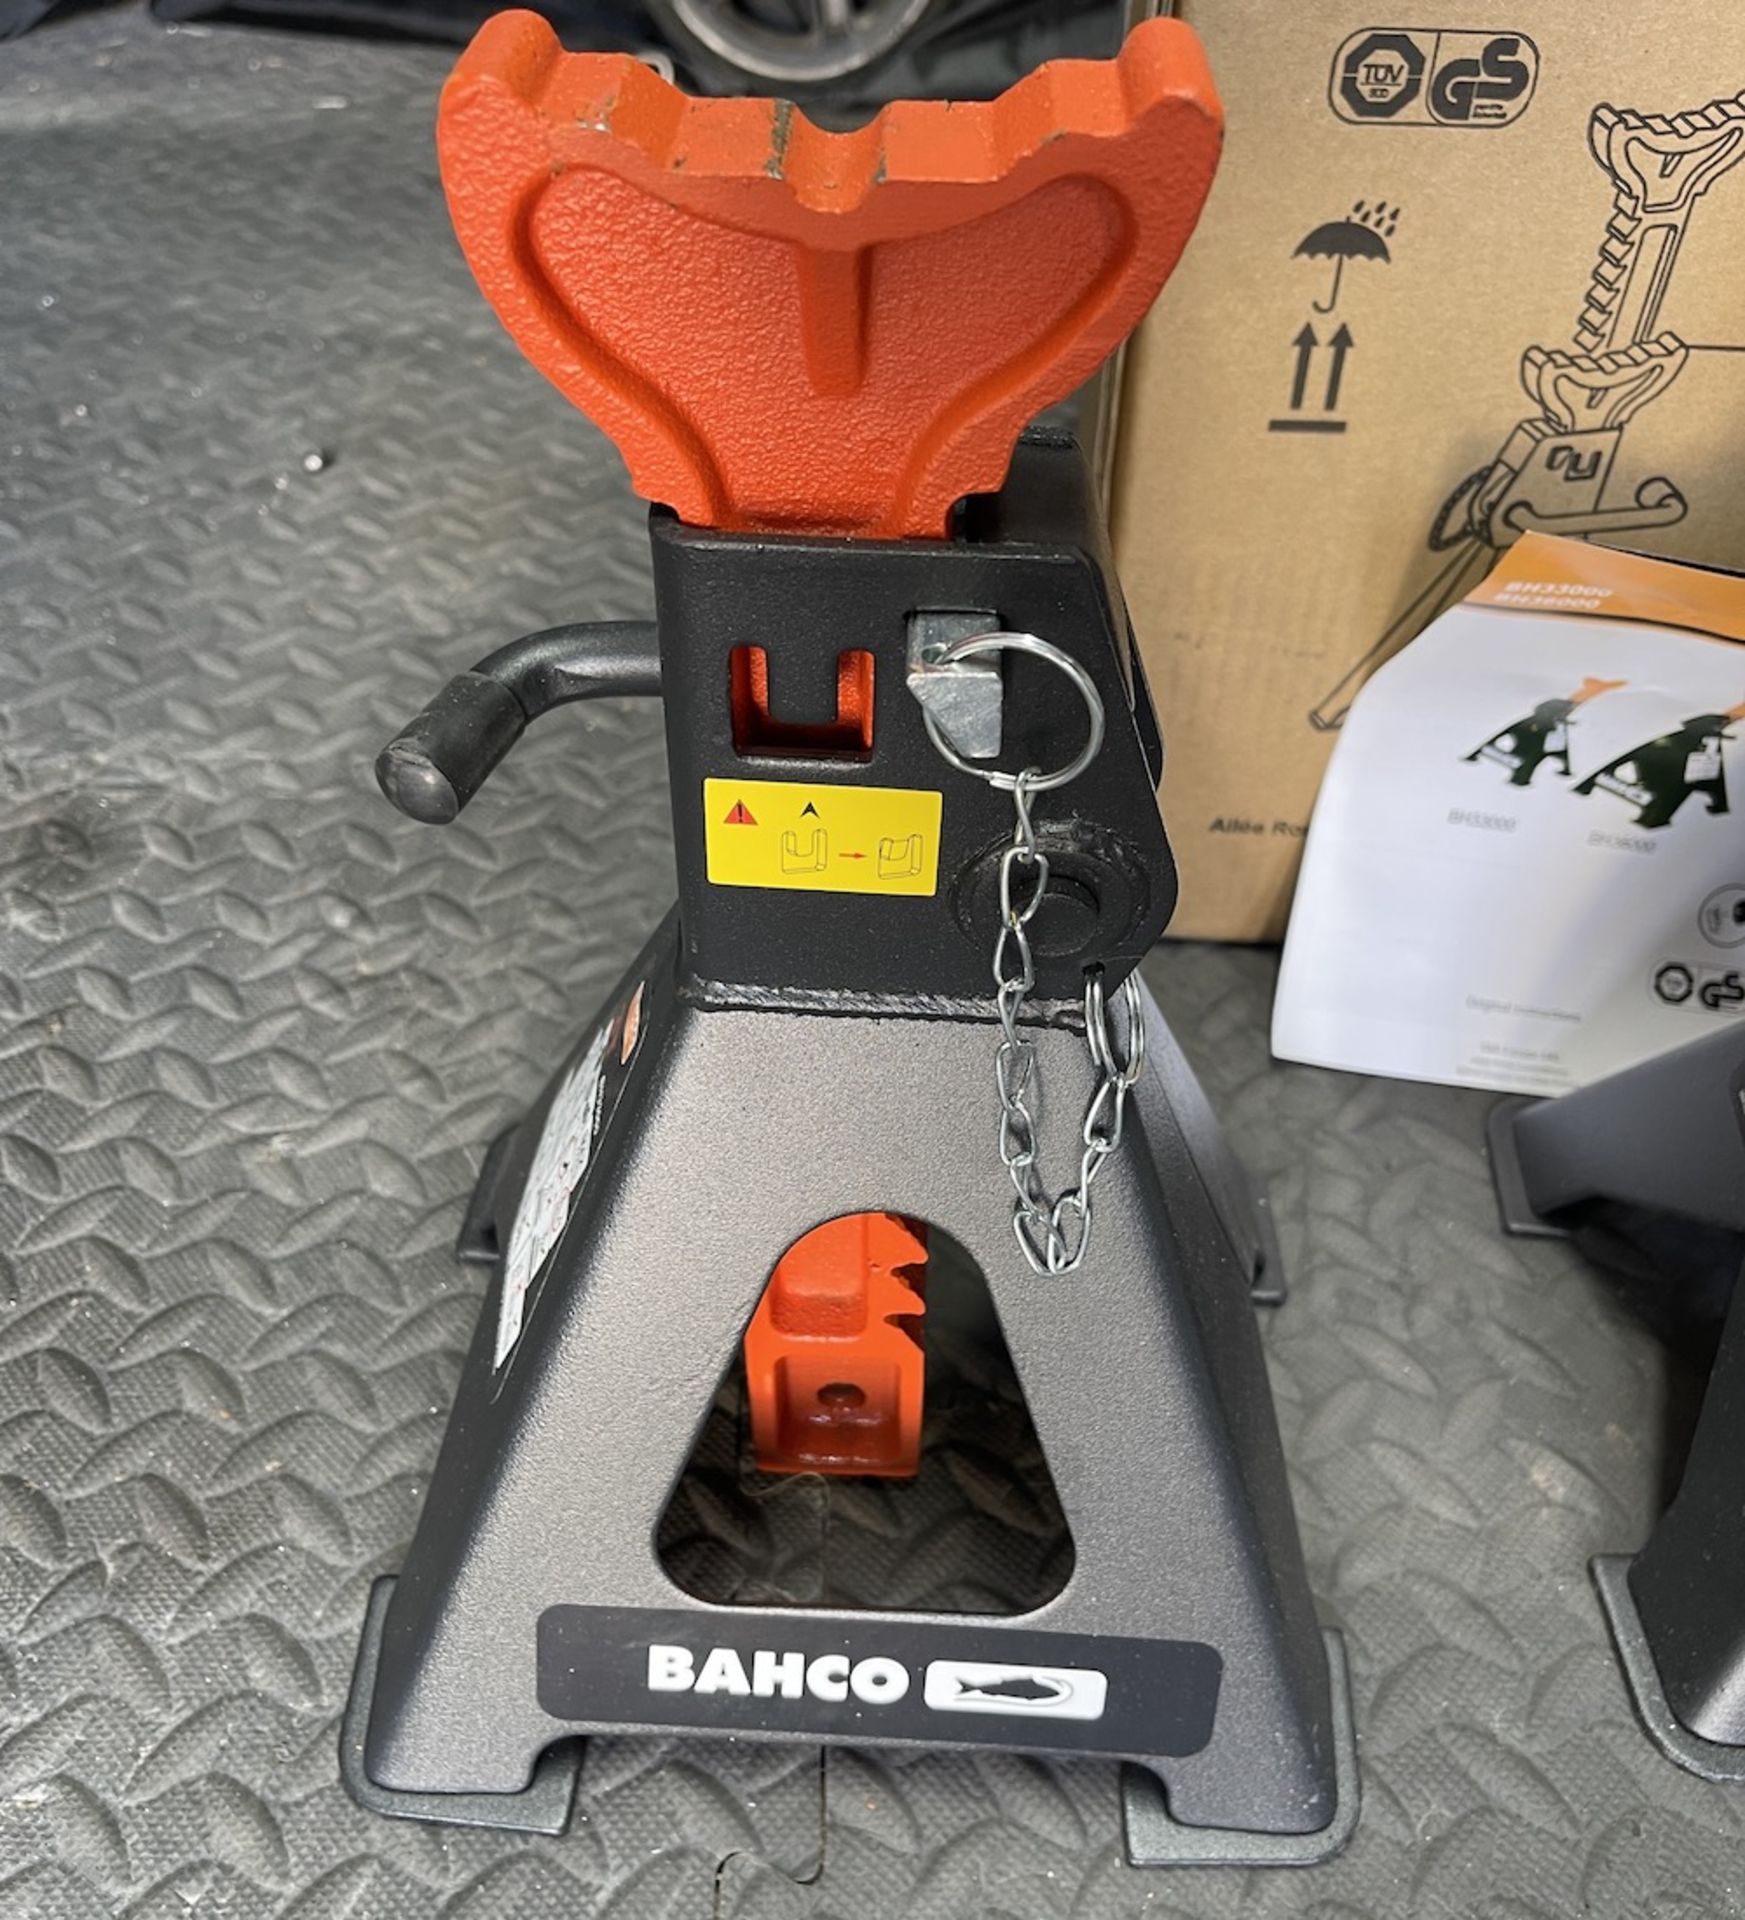 2x BAHCO 3 ton Jack Stands | Original boxes included - Image 3 of 3